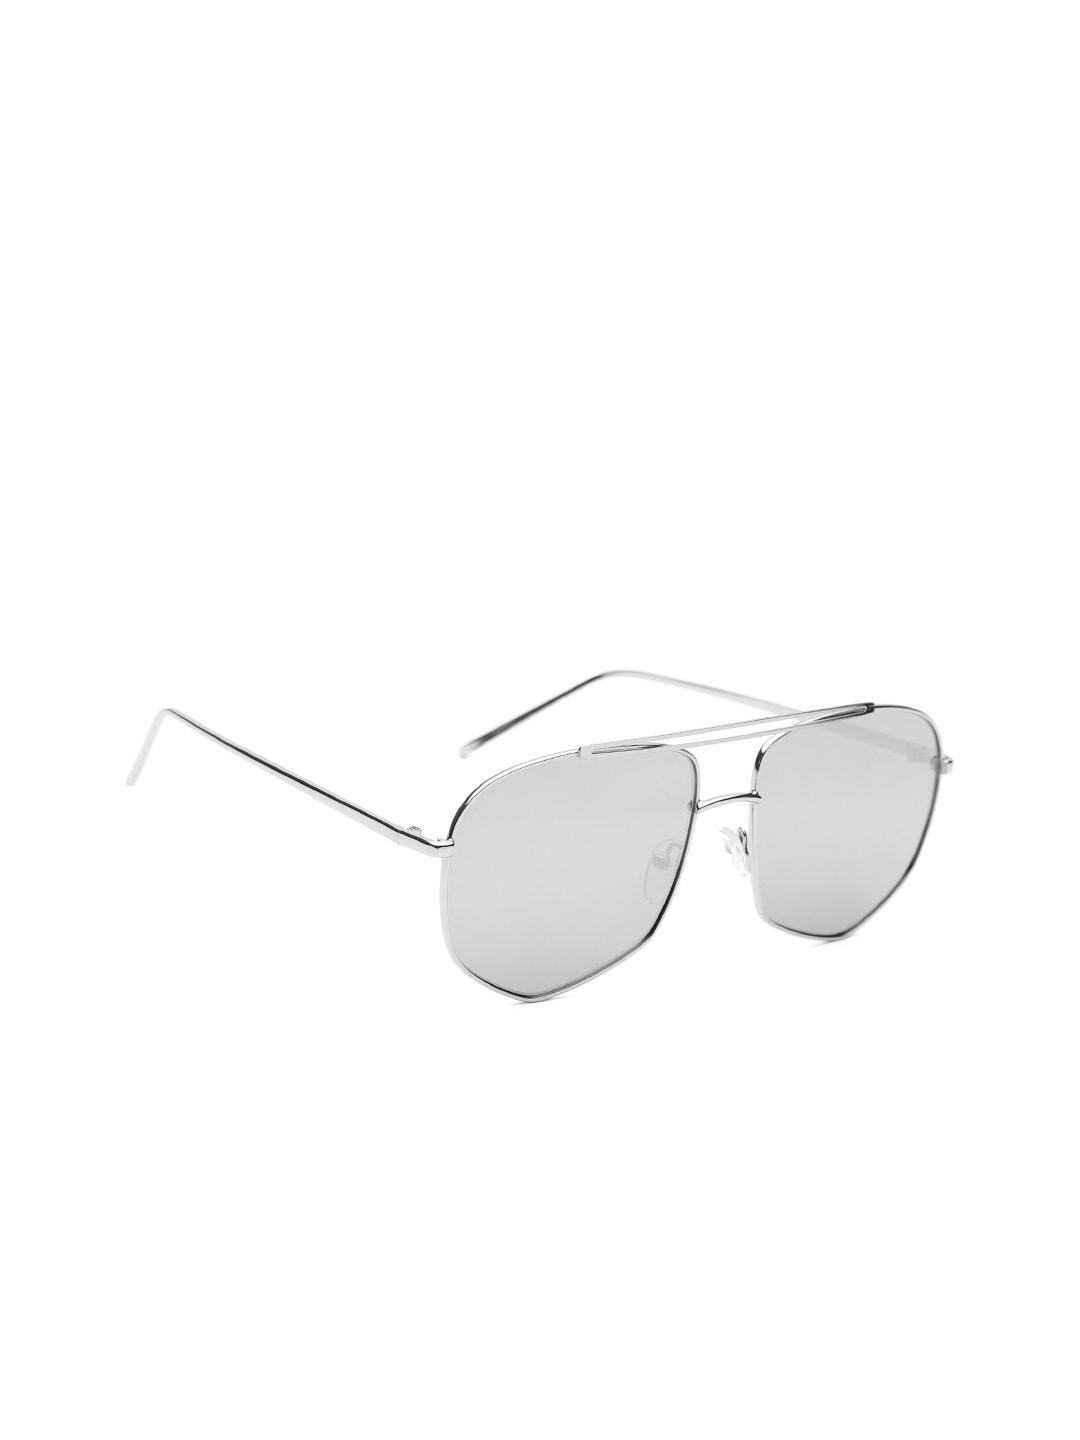 the roadster lifestyle co unisex mirrored oversized sunglasses mfb-pn-ps-t10273